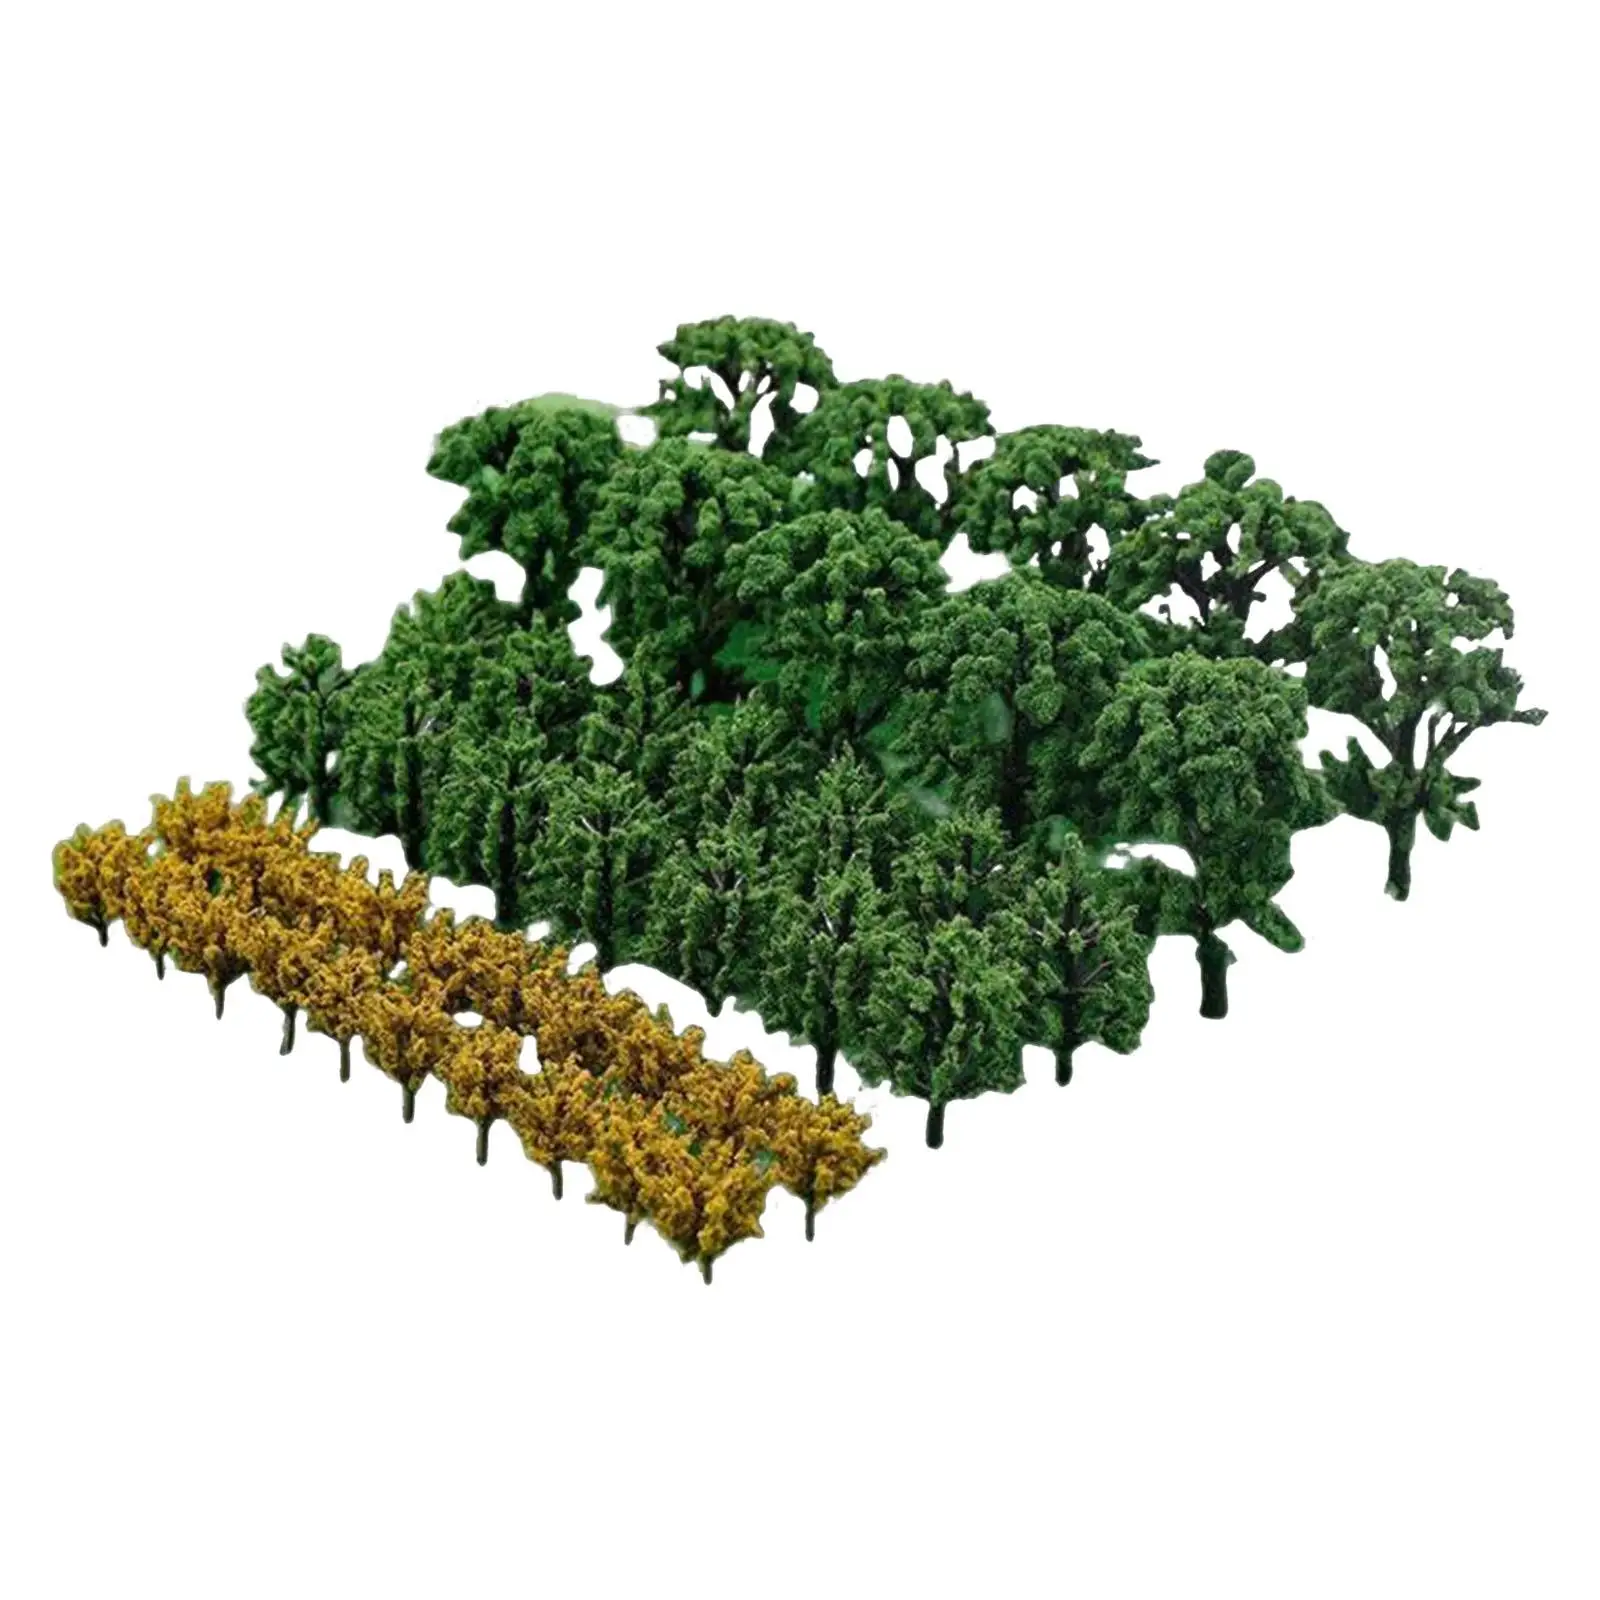 50Pcs Simulation Scenery Tree Mixed Model Trees for Fairy Garden Micro Landscape Sand Table DIY Material Accessories